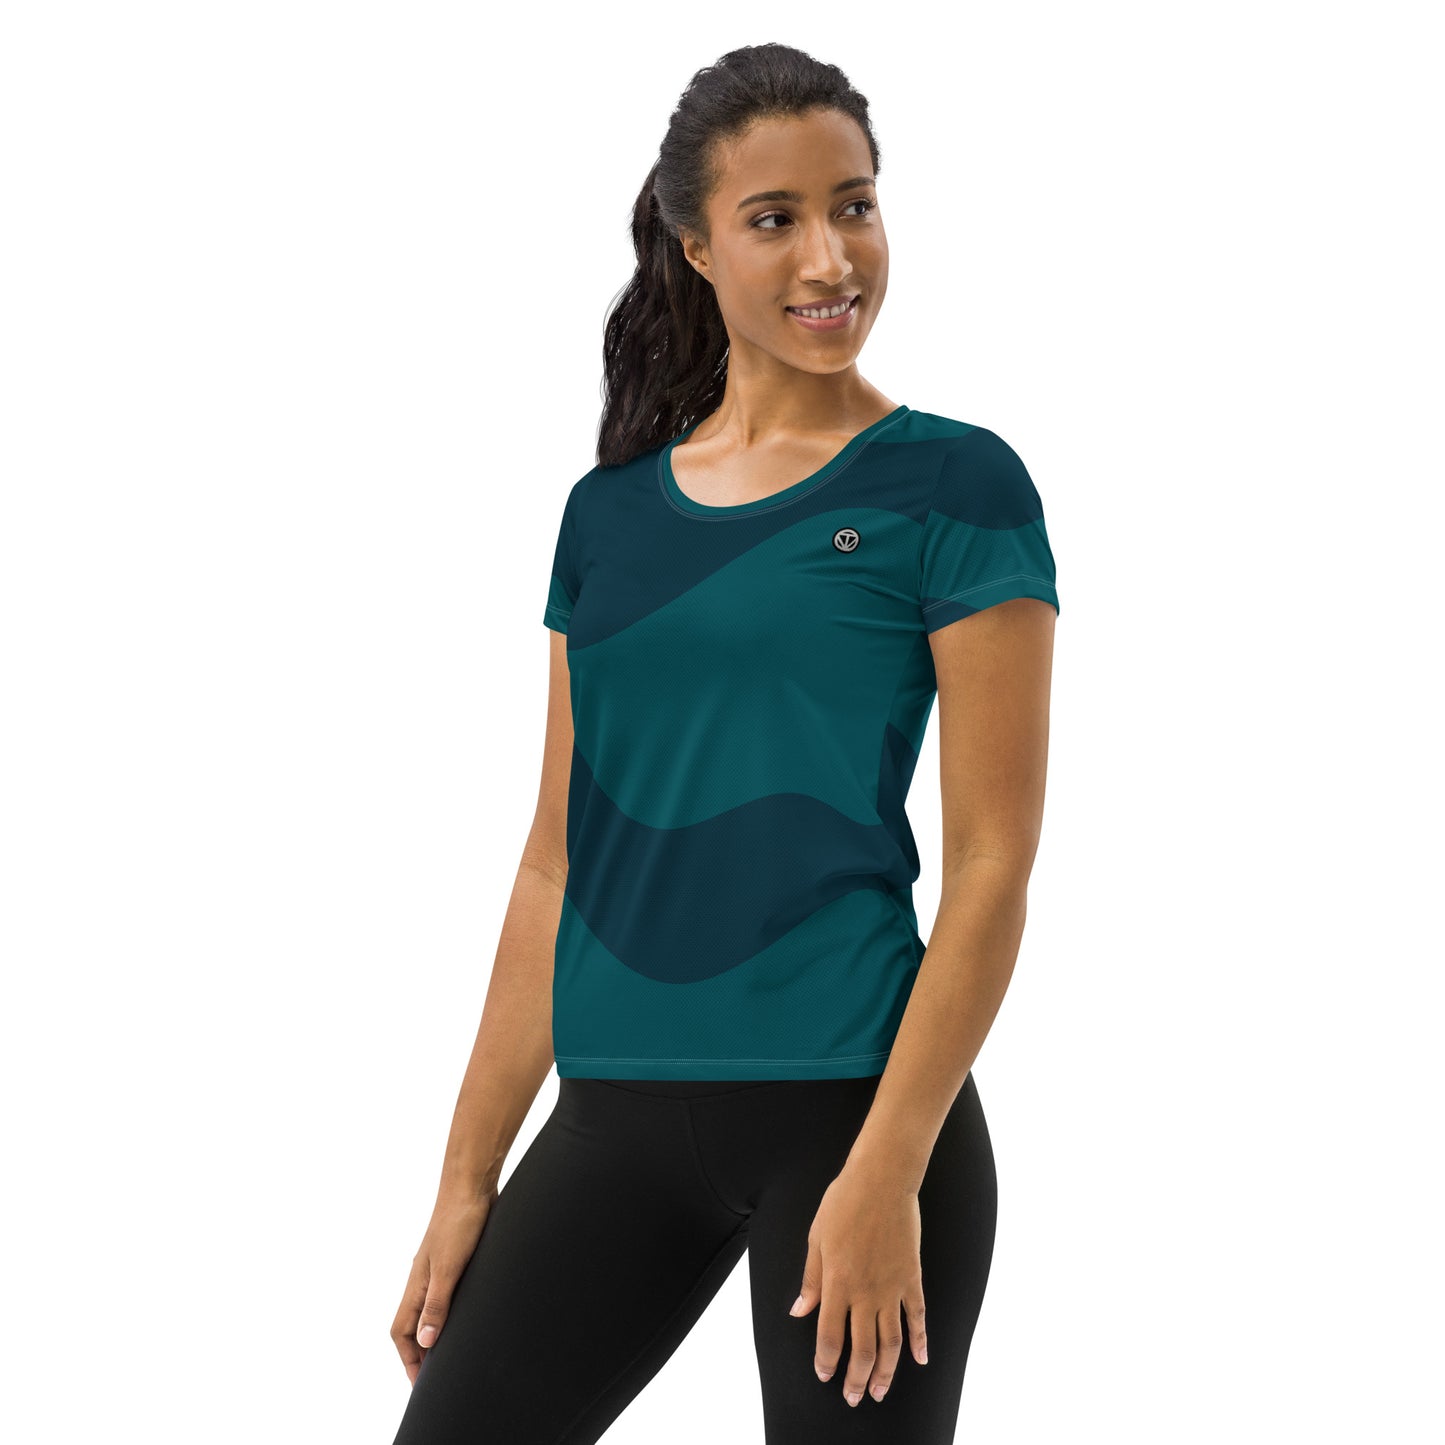 TIME OF VIBES - Women's Athletic T-shirt ABSTRACT (Sherpa Blue) - €45.00